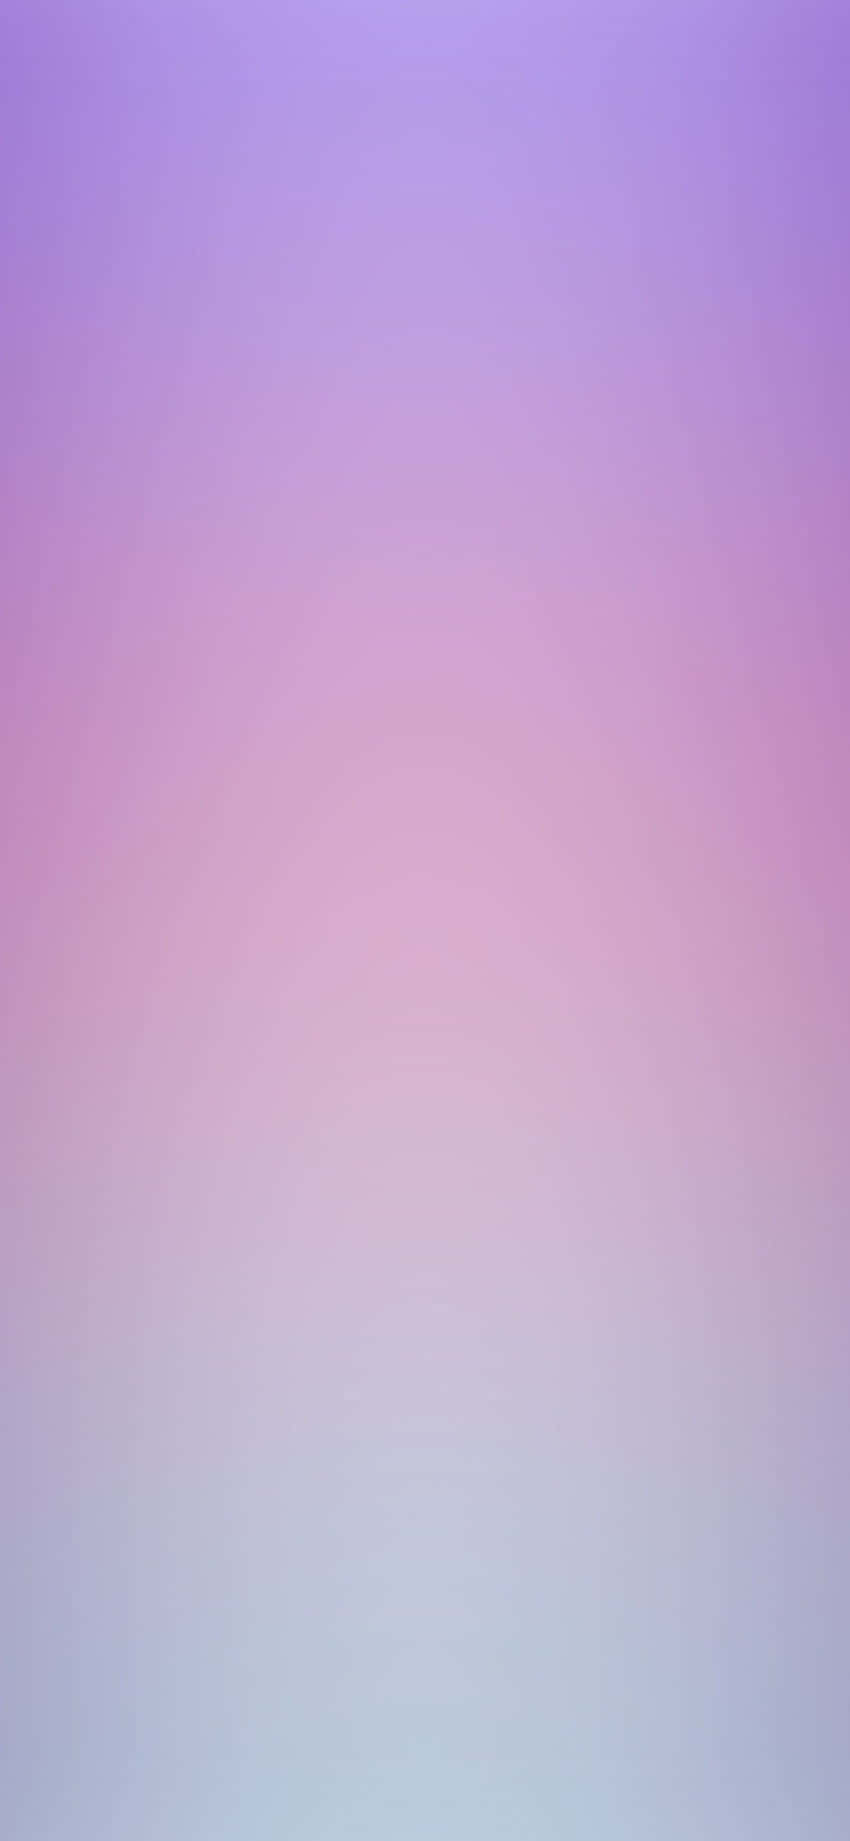 A Burst Of Lilac Color In The Sky Wallpaper